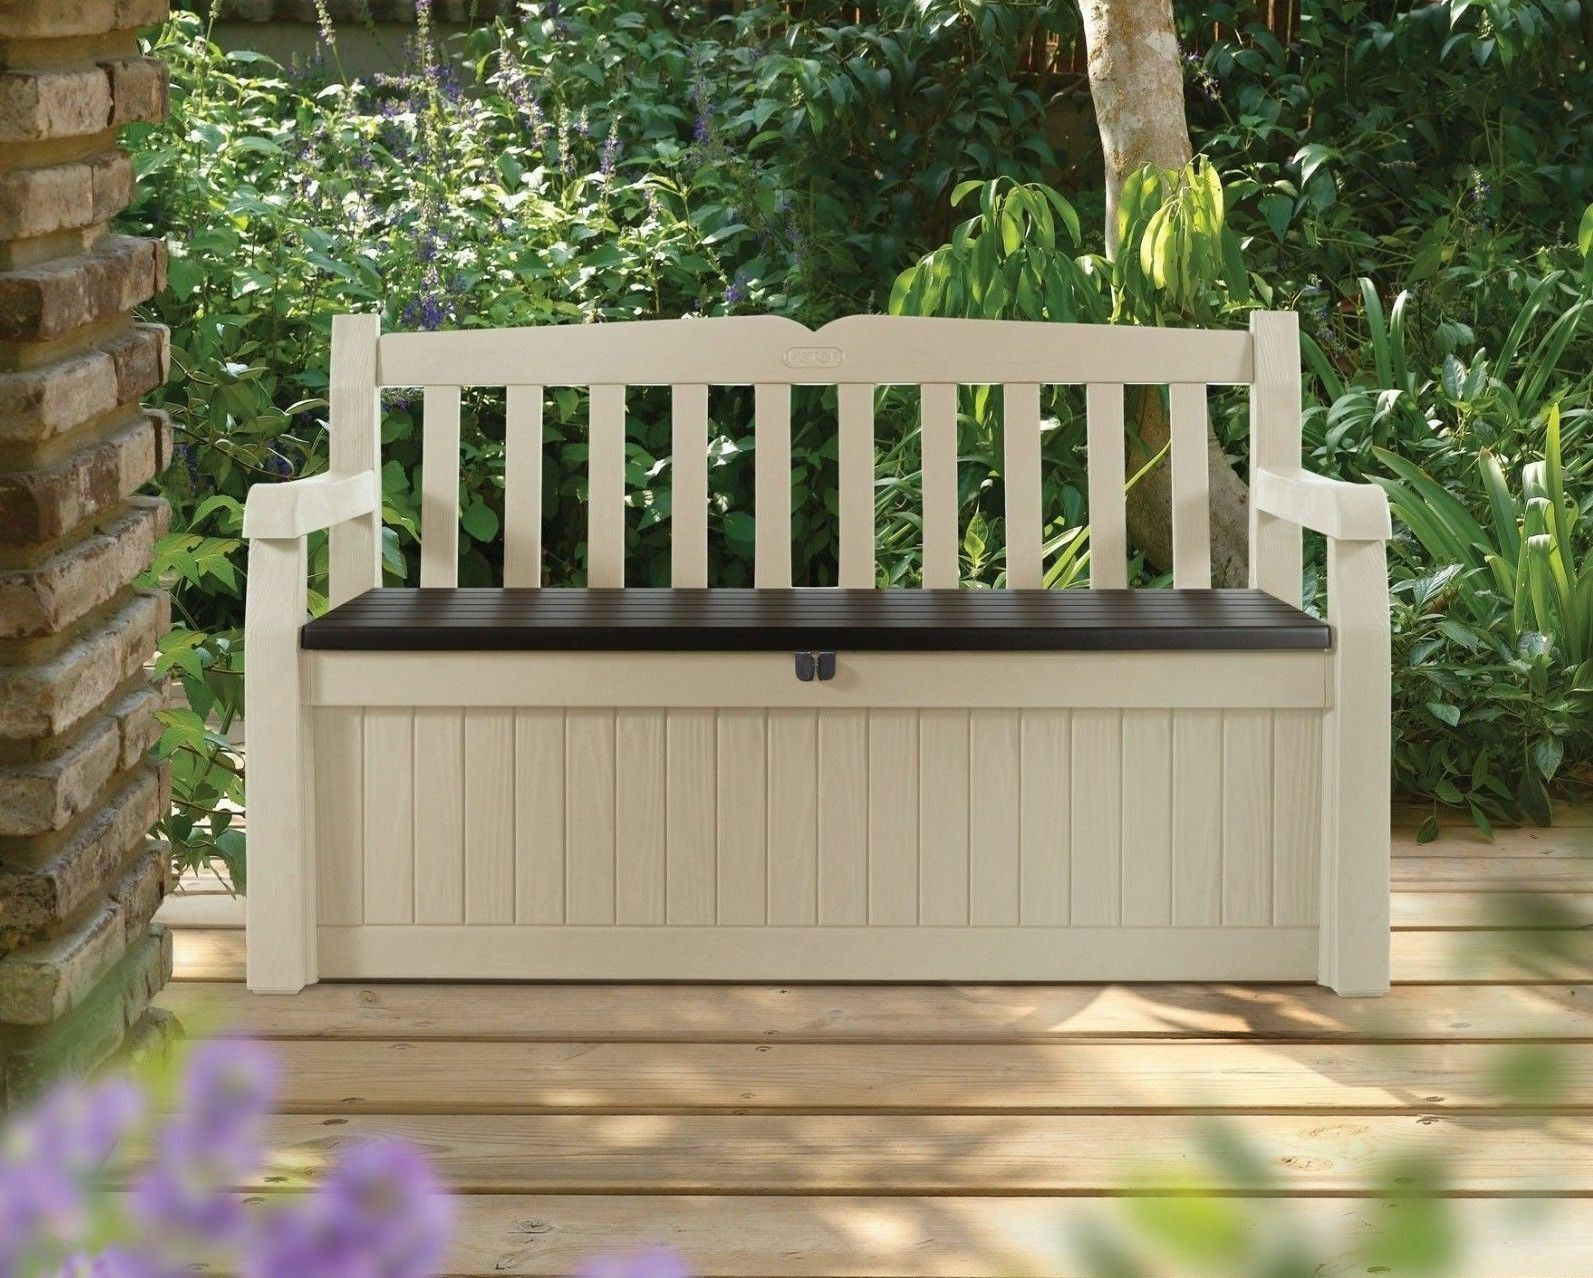 Storage Bench For Deck
 How to Build a Deck Storage Bench